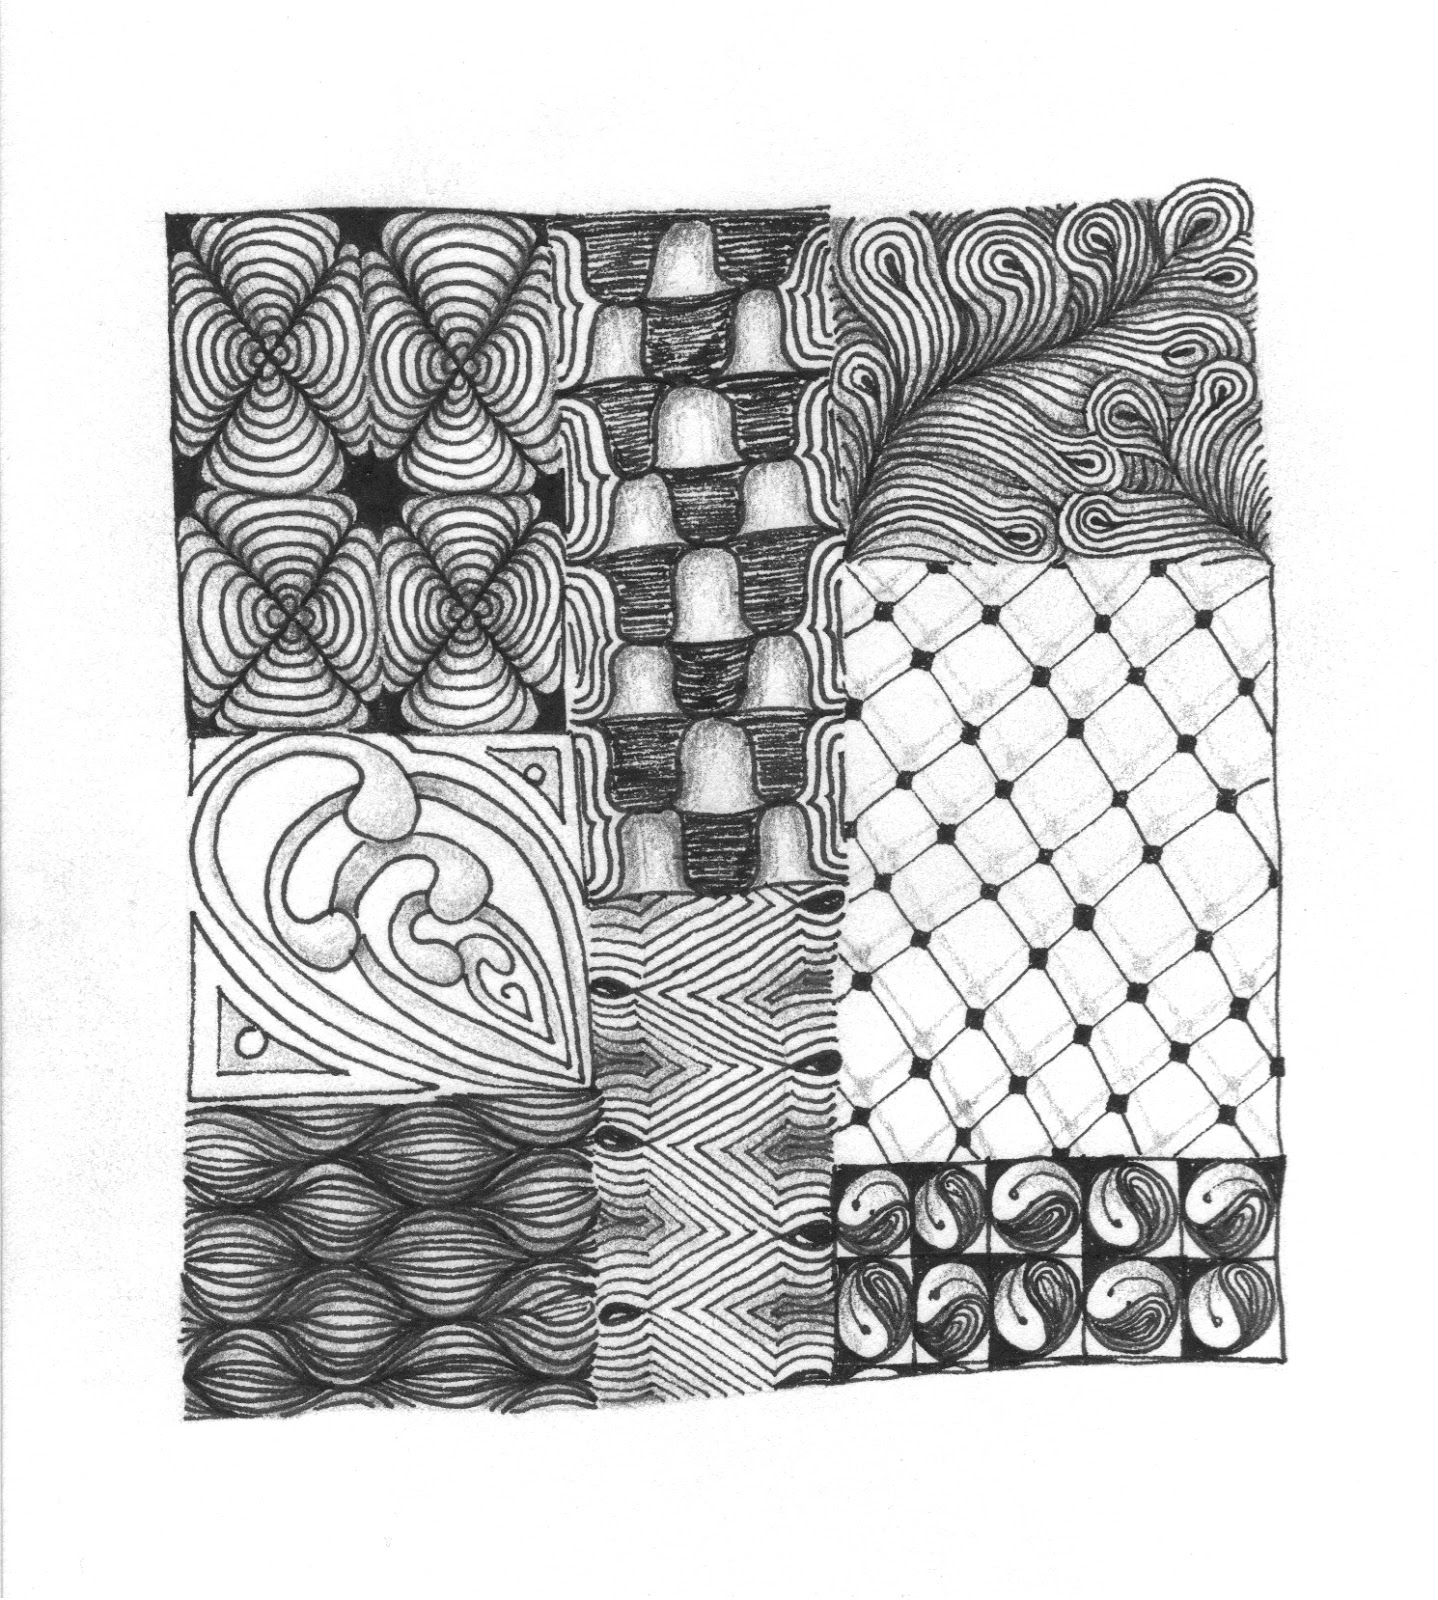 Cut'n It Up... And Sewing It Back Together!: Zentangle Inspired Art Gallery